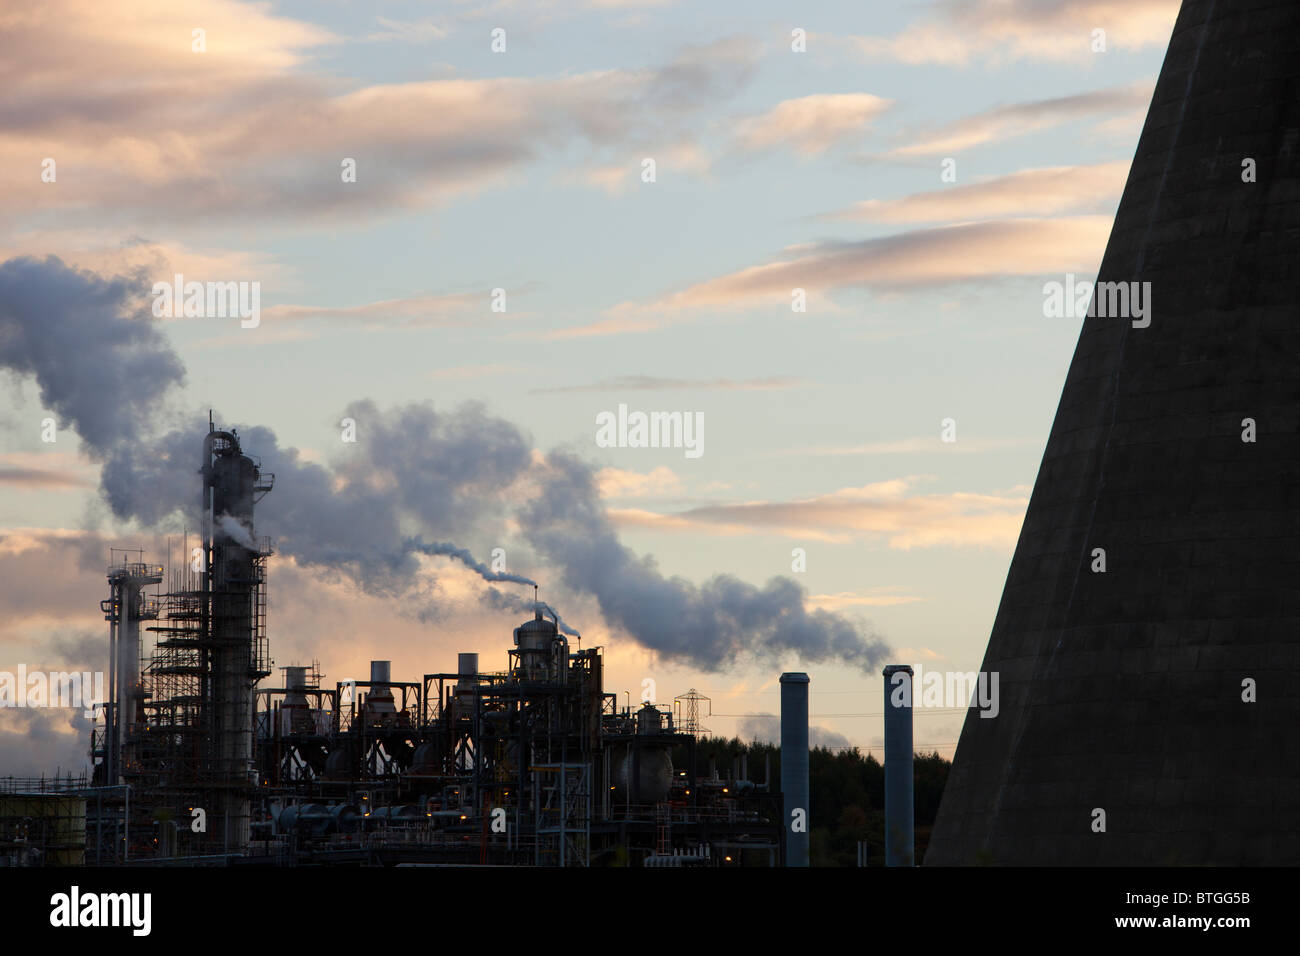 The Ineos oil refinery at Grangemouth, Scotland, UK, is responsible for massive carbon emissions. Stock Photo